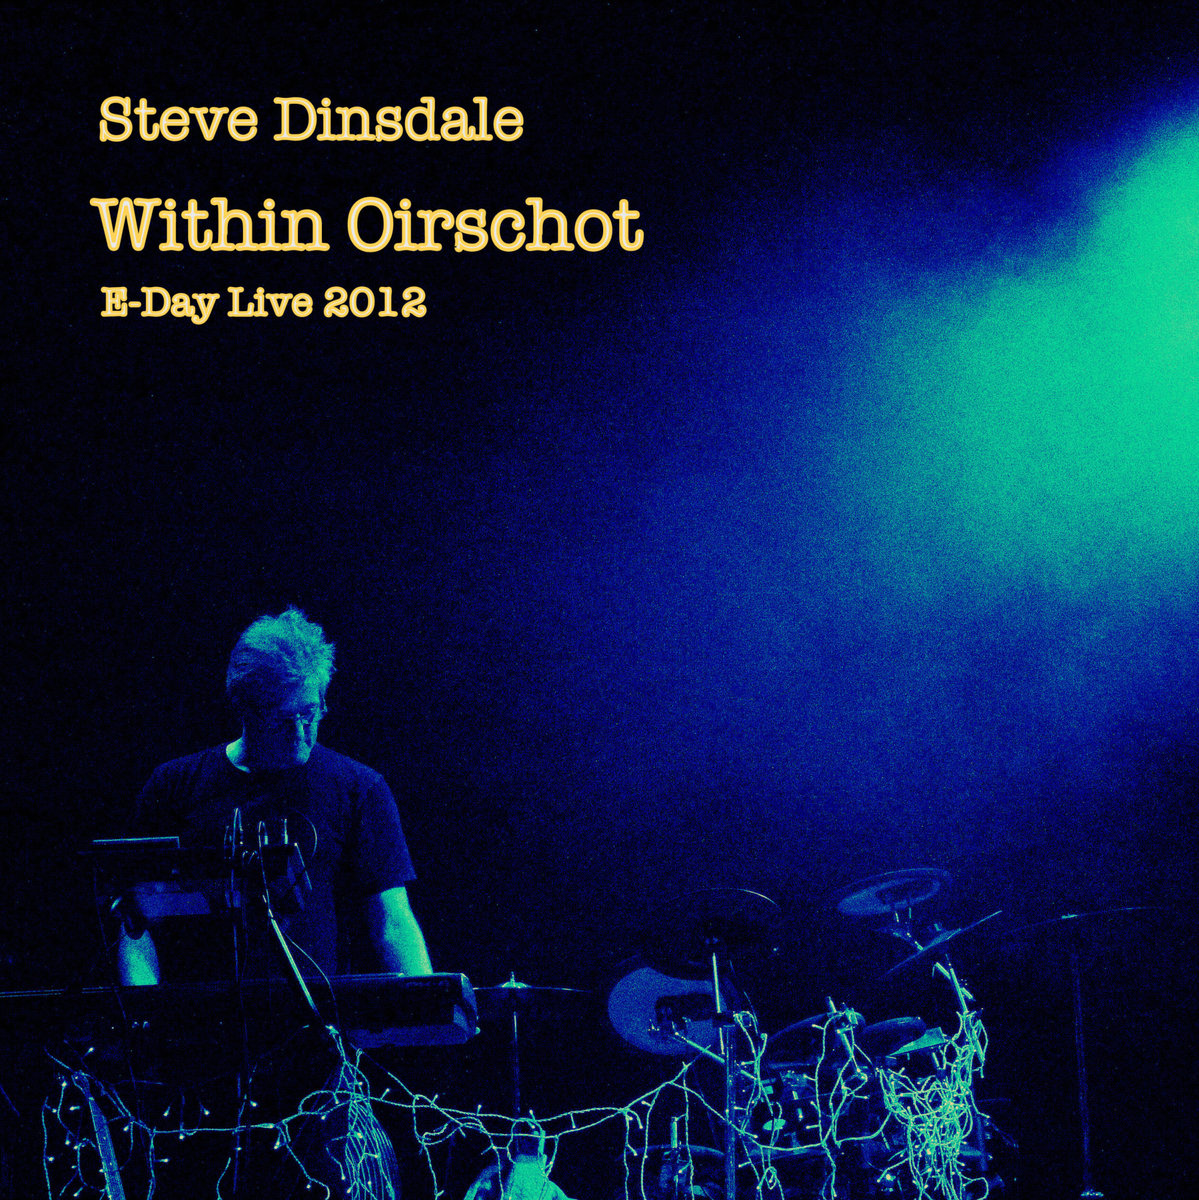 steve dinsdale: within oirschot